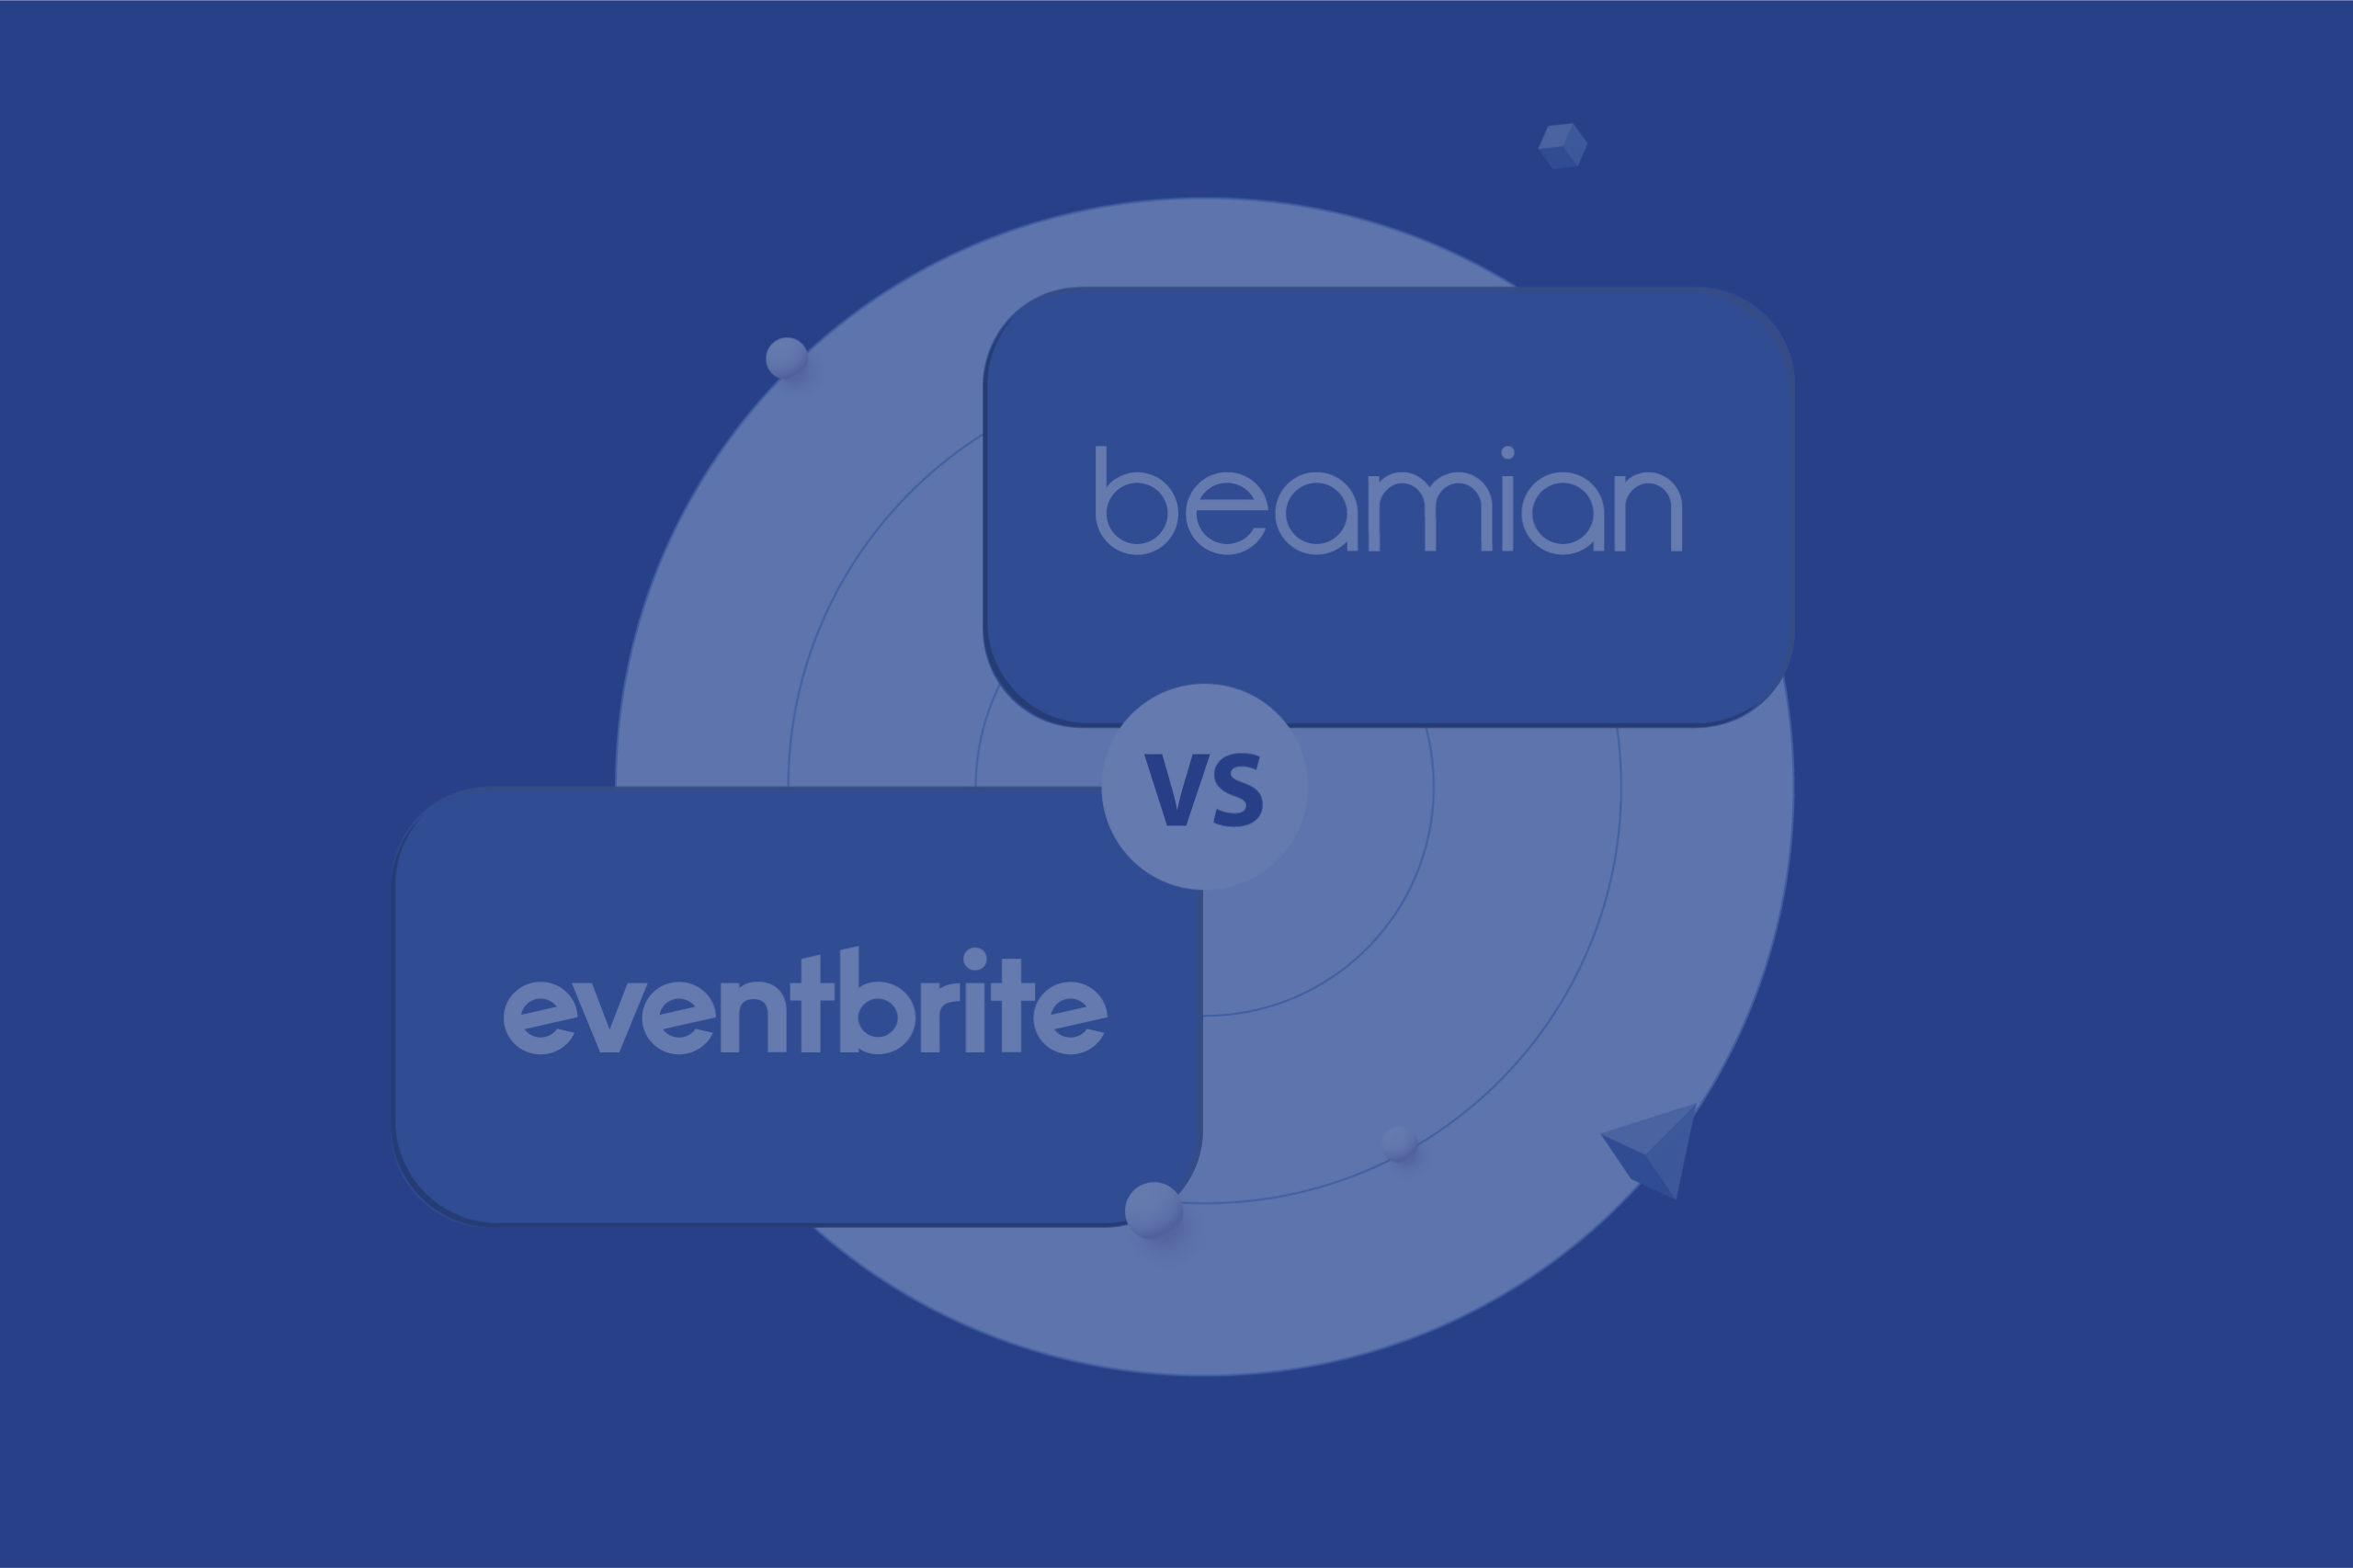 Side-by-side Comparison: Eventbrite vs. beamian